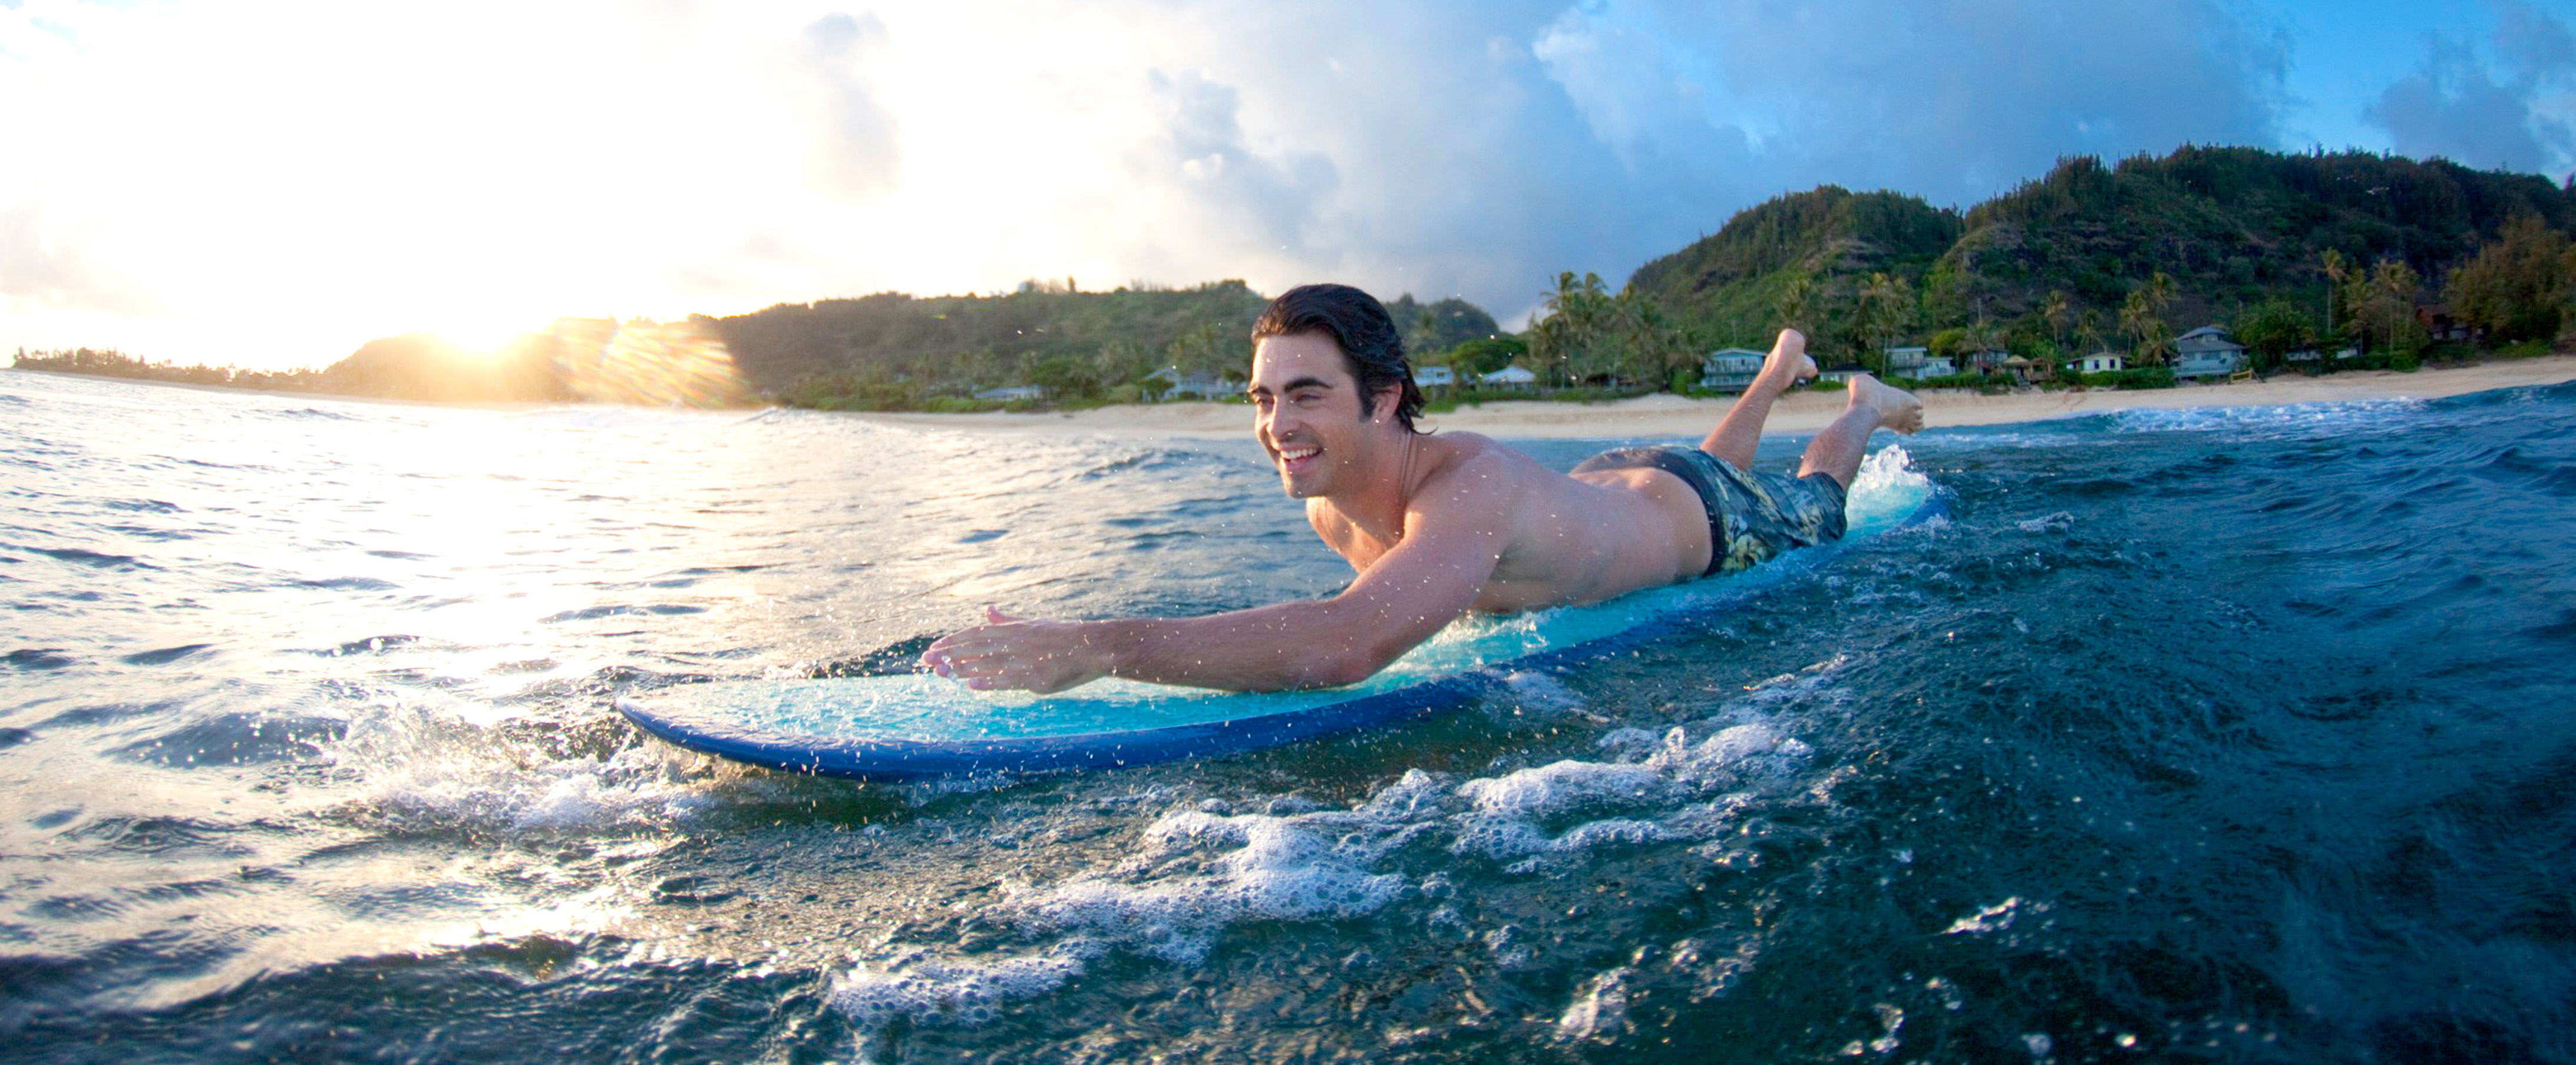 A young man on a surfboard paddles out into the ocean as a coastline with tree-covered hills stretches behind him